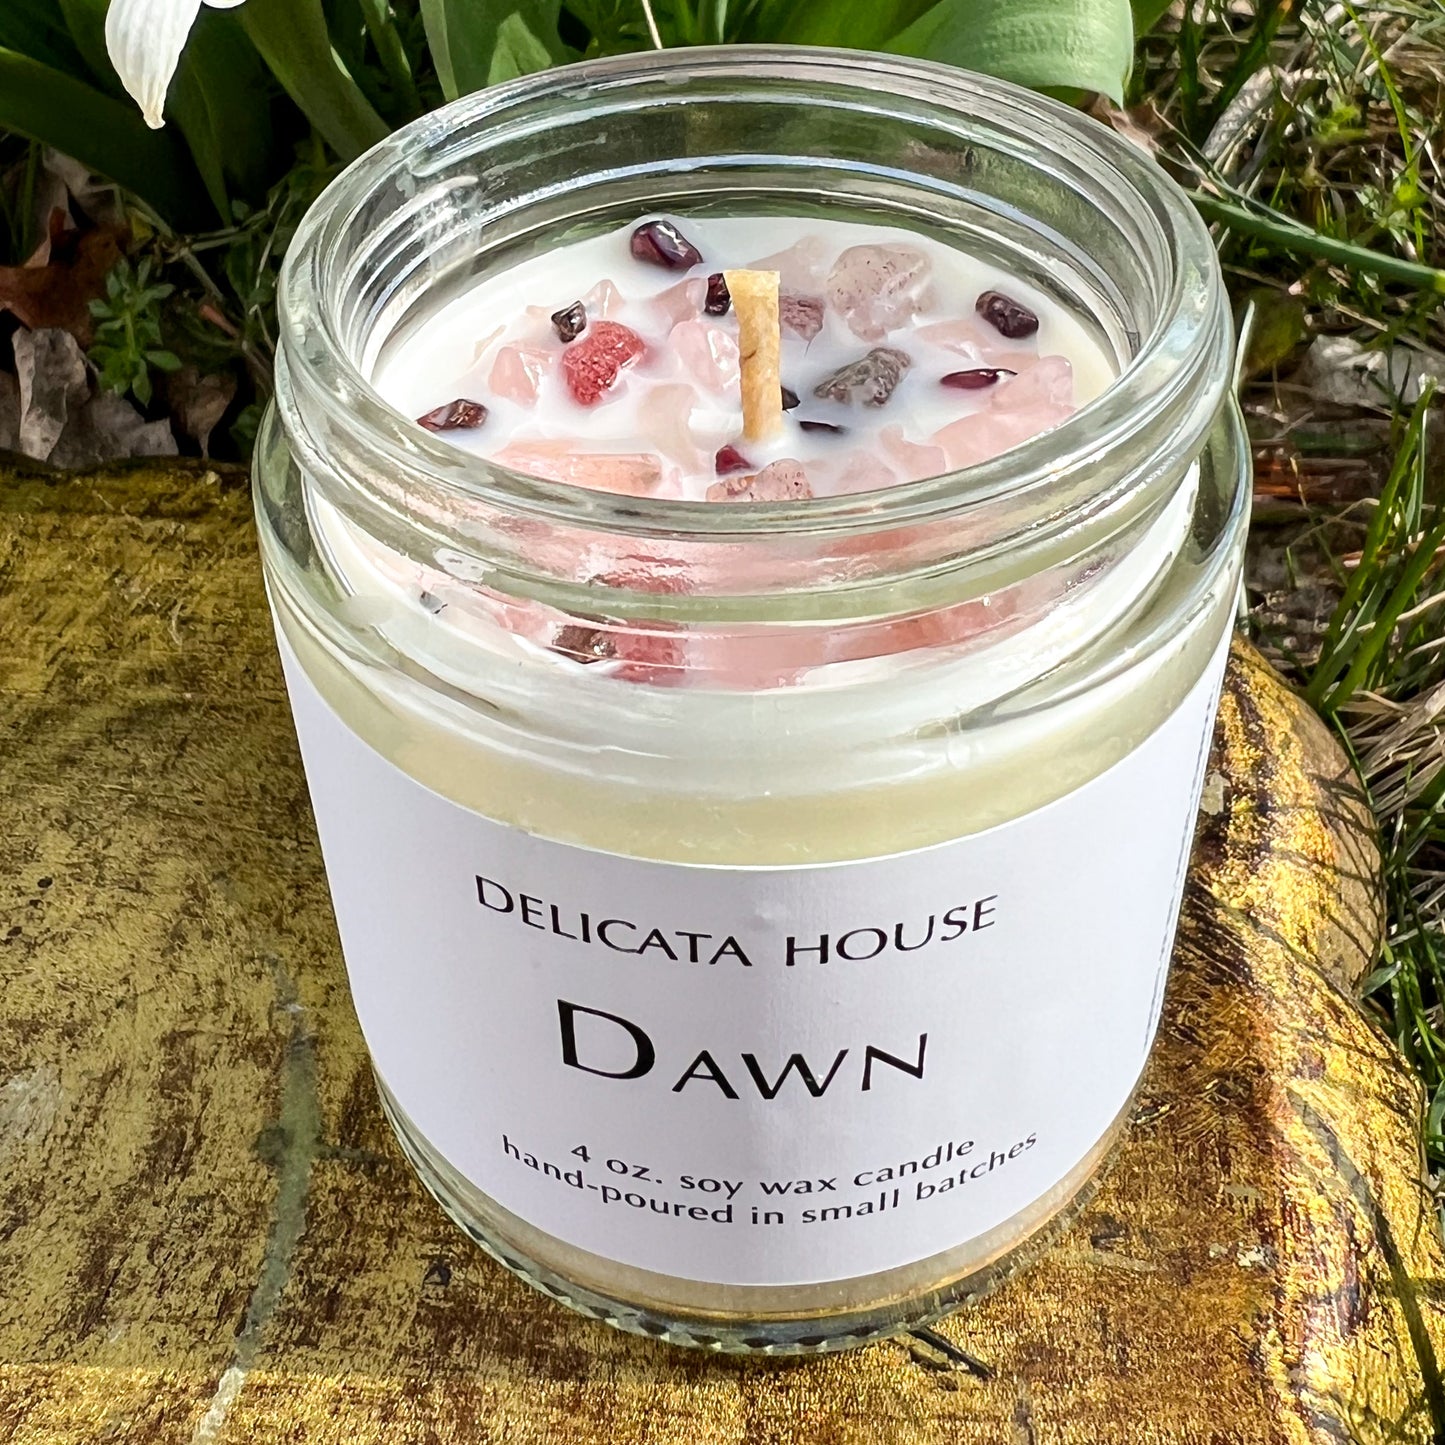 Dawn Crystal Candle - Hand-poured Soy Wax Aromatherapy Crystal Candle - Mother's Day Gift - Gift for Beltane